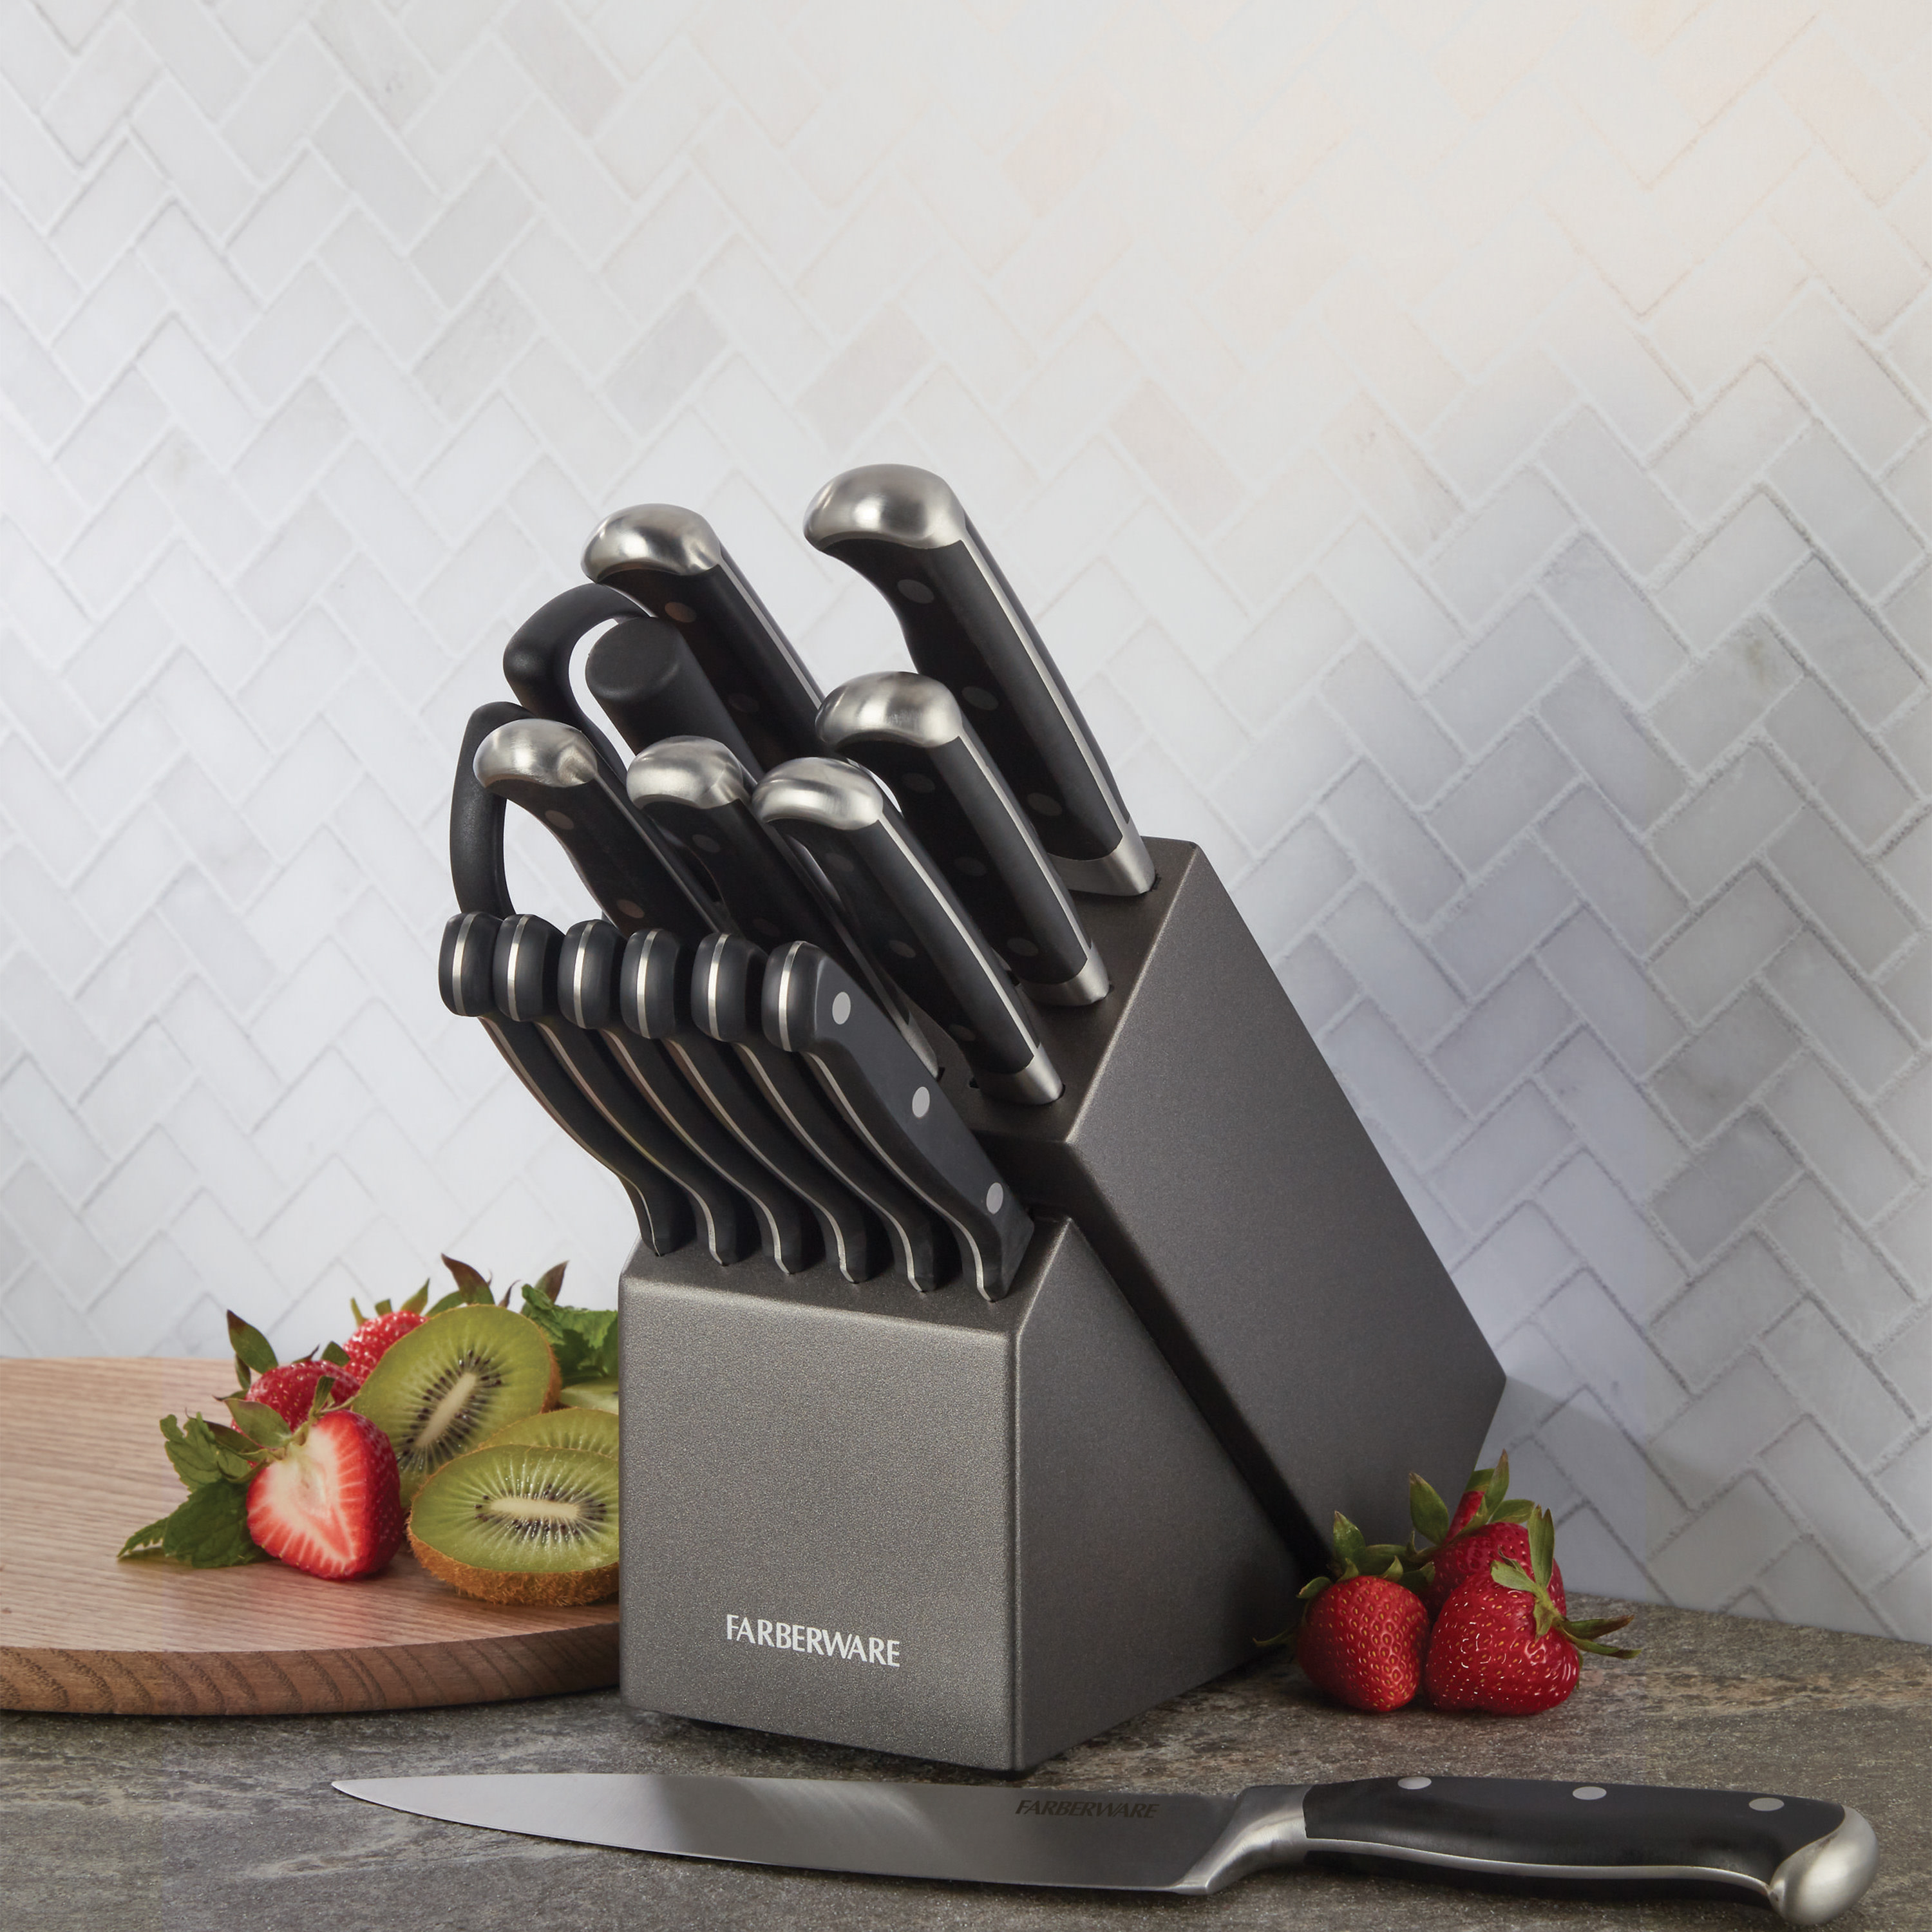 Farberware 15-piece Forged Triple-Rivet Kitchen Knife Block Set with Black Block and Black Handles - image 3 of 20